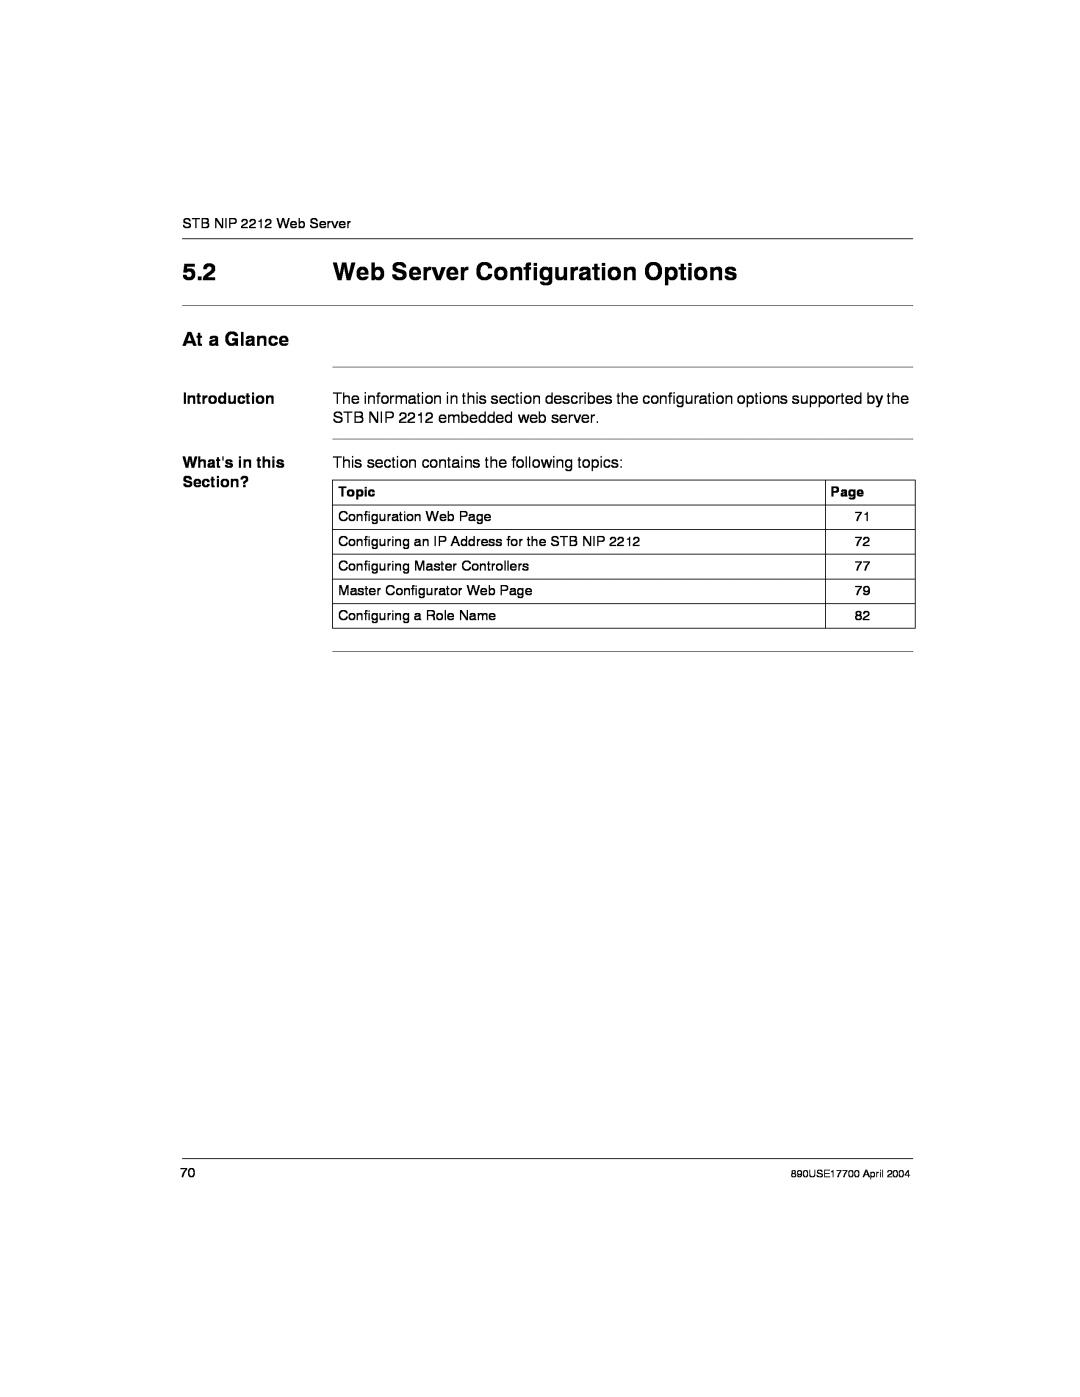 Schneider Electric manual Web Server Configuration Options, At a Glance, 890USE17700 April 